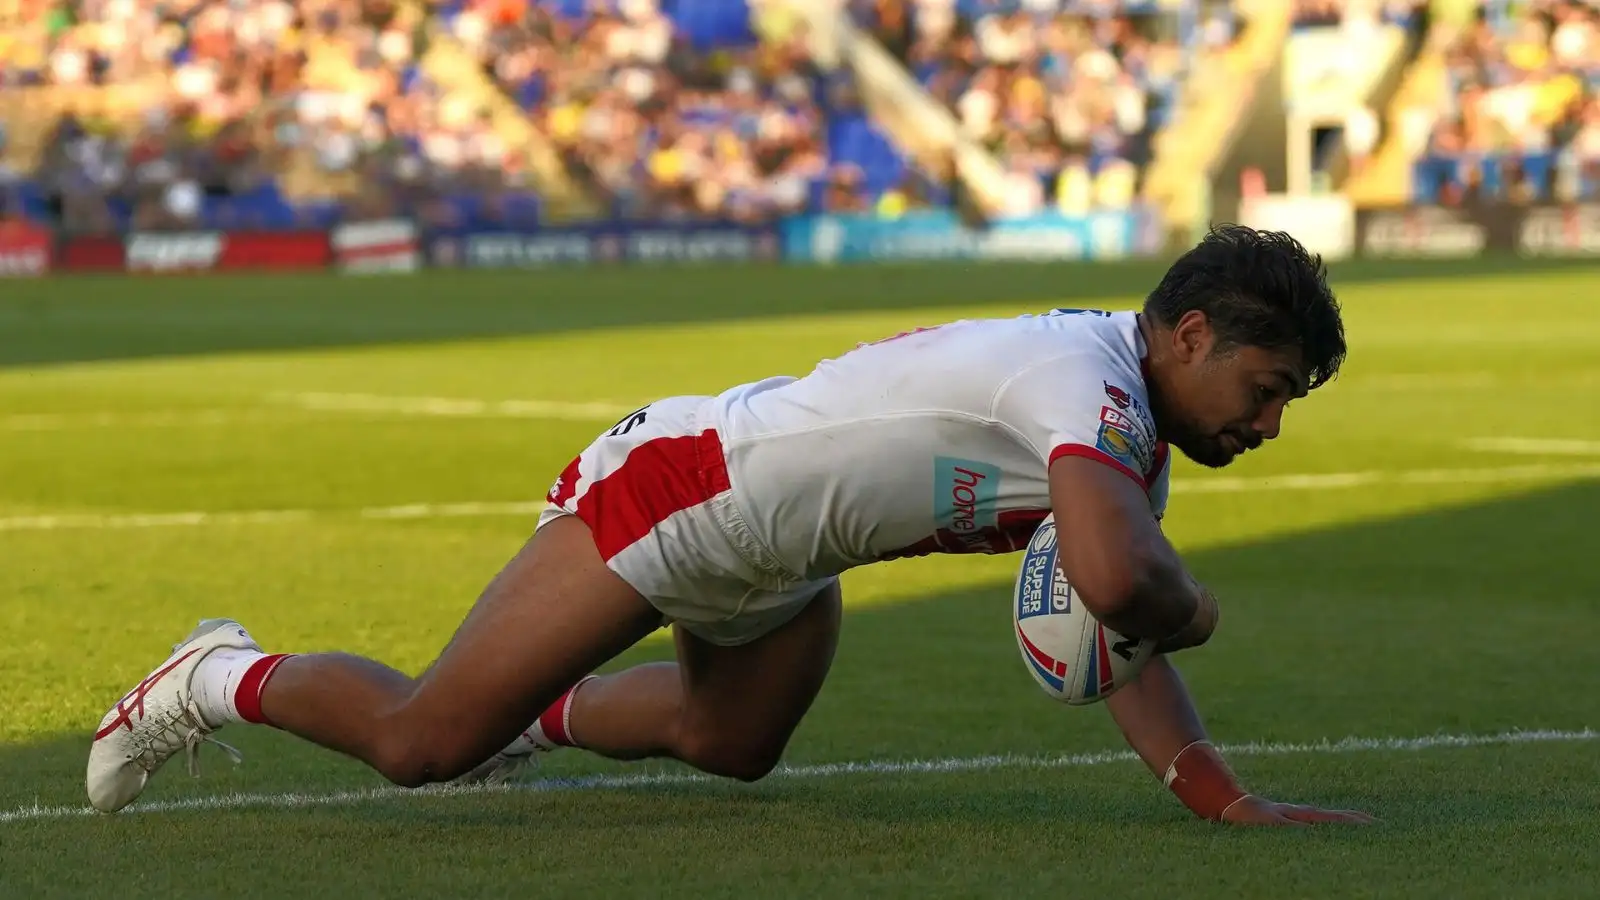 St Helens forward James Bell scores against Warrington. Photo by PA Images / Alamy Stock Photo.